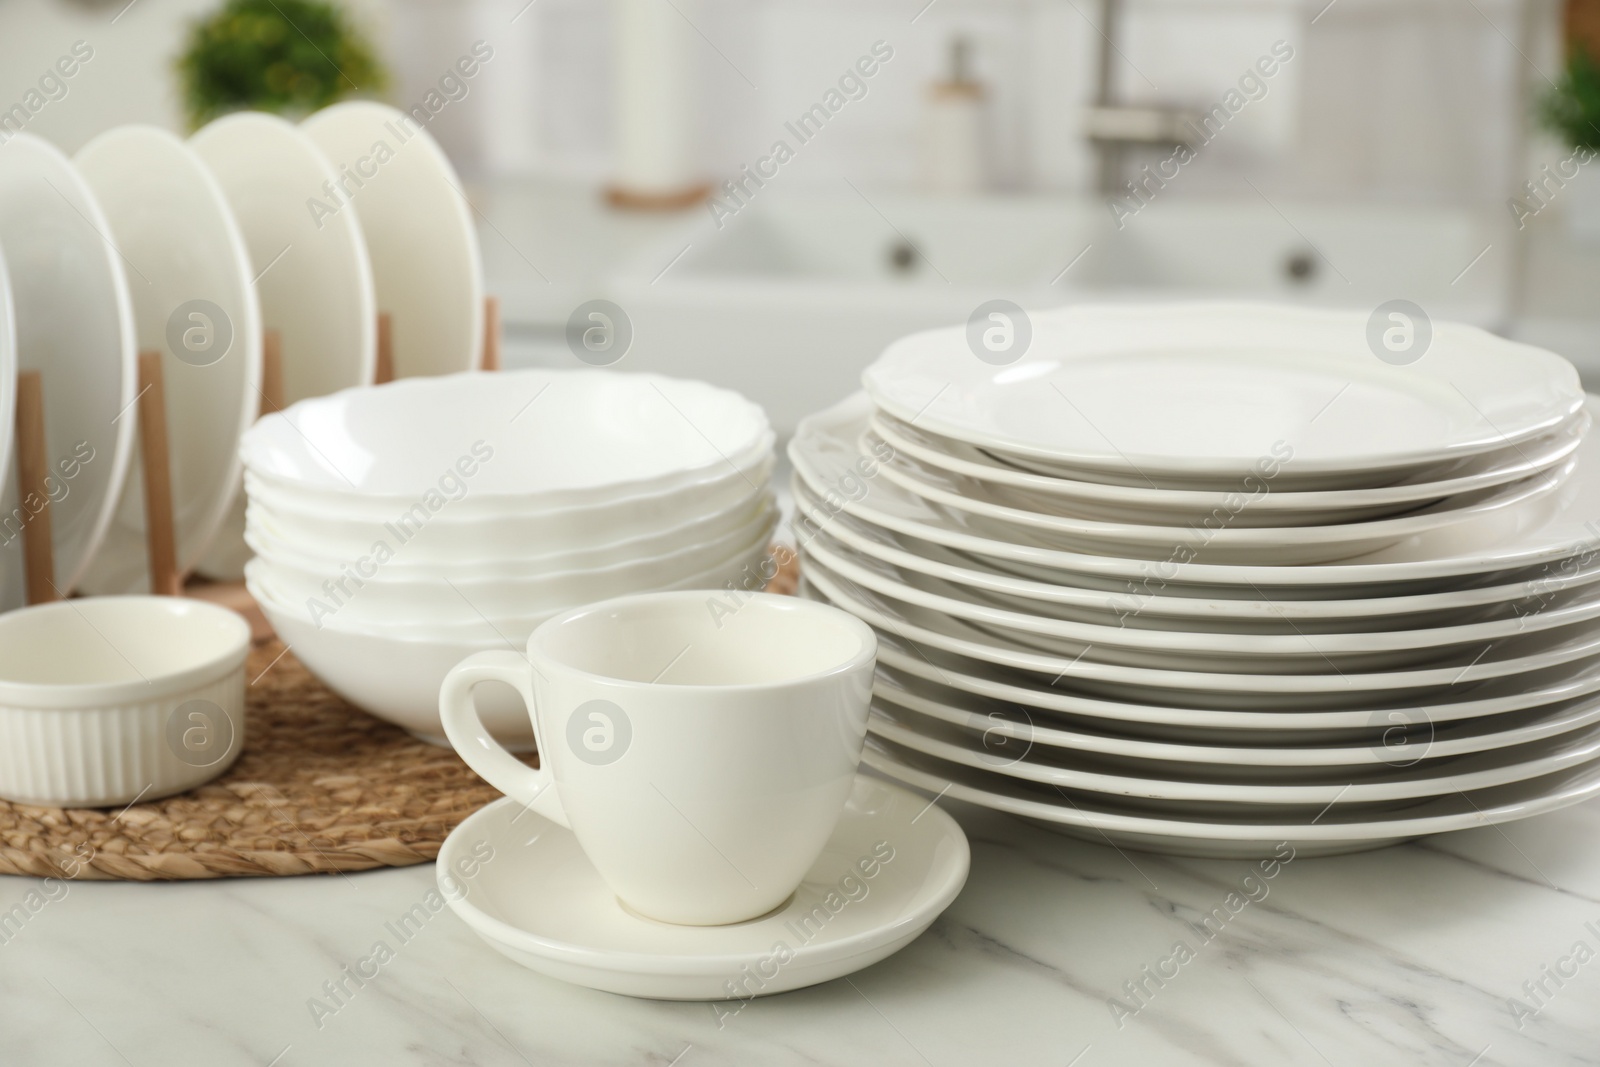 Photo of Clean plates, bowls and cup on white marble table in kitchen